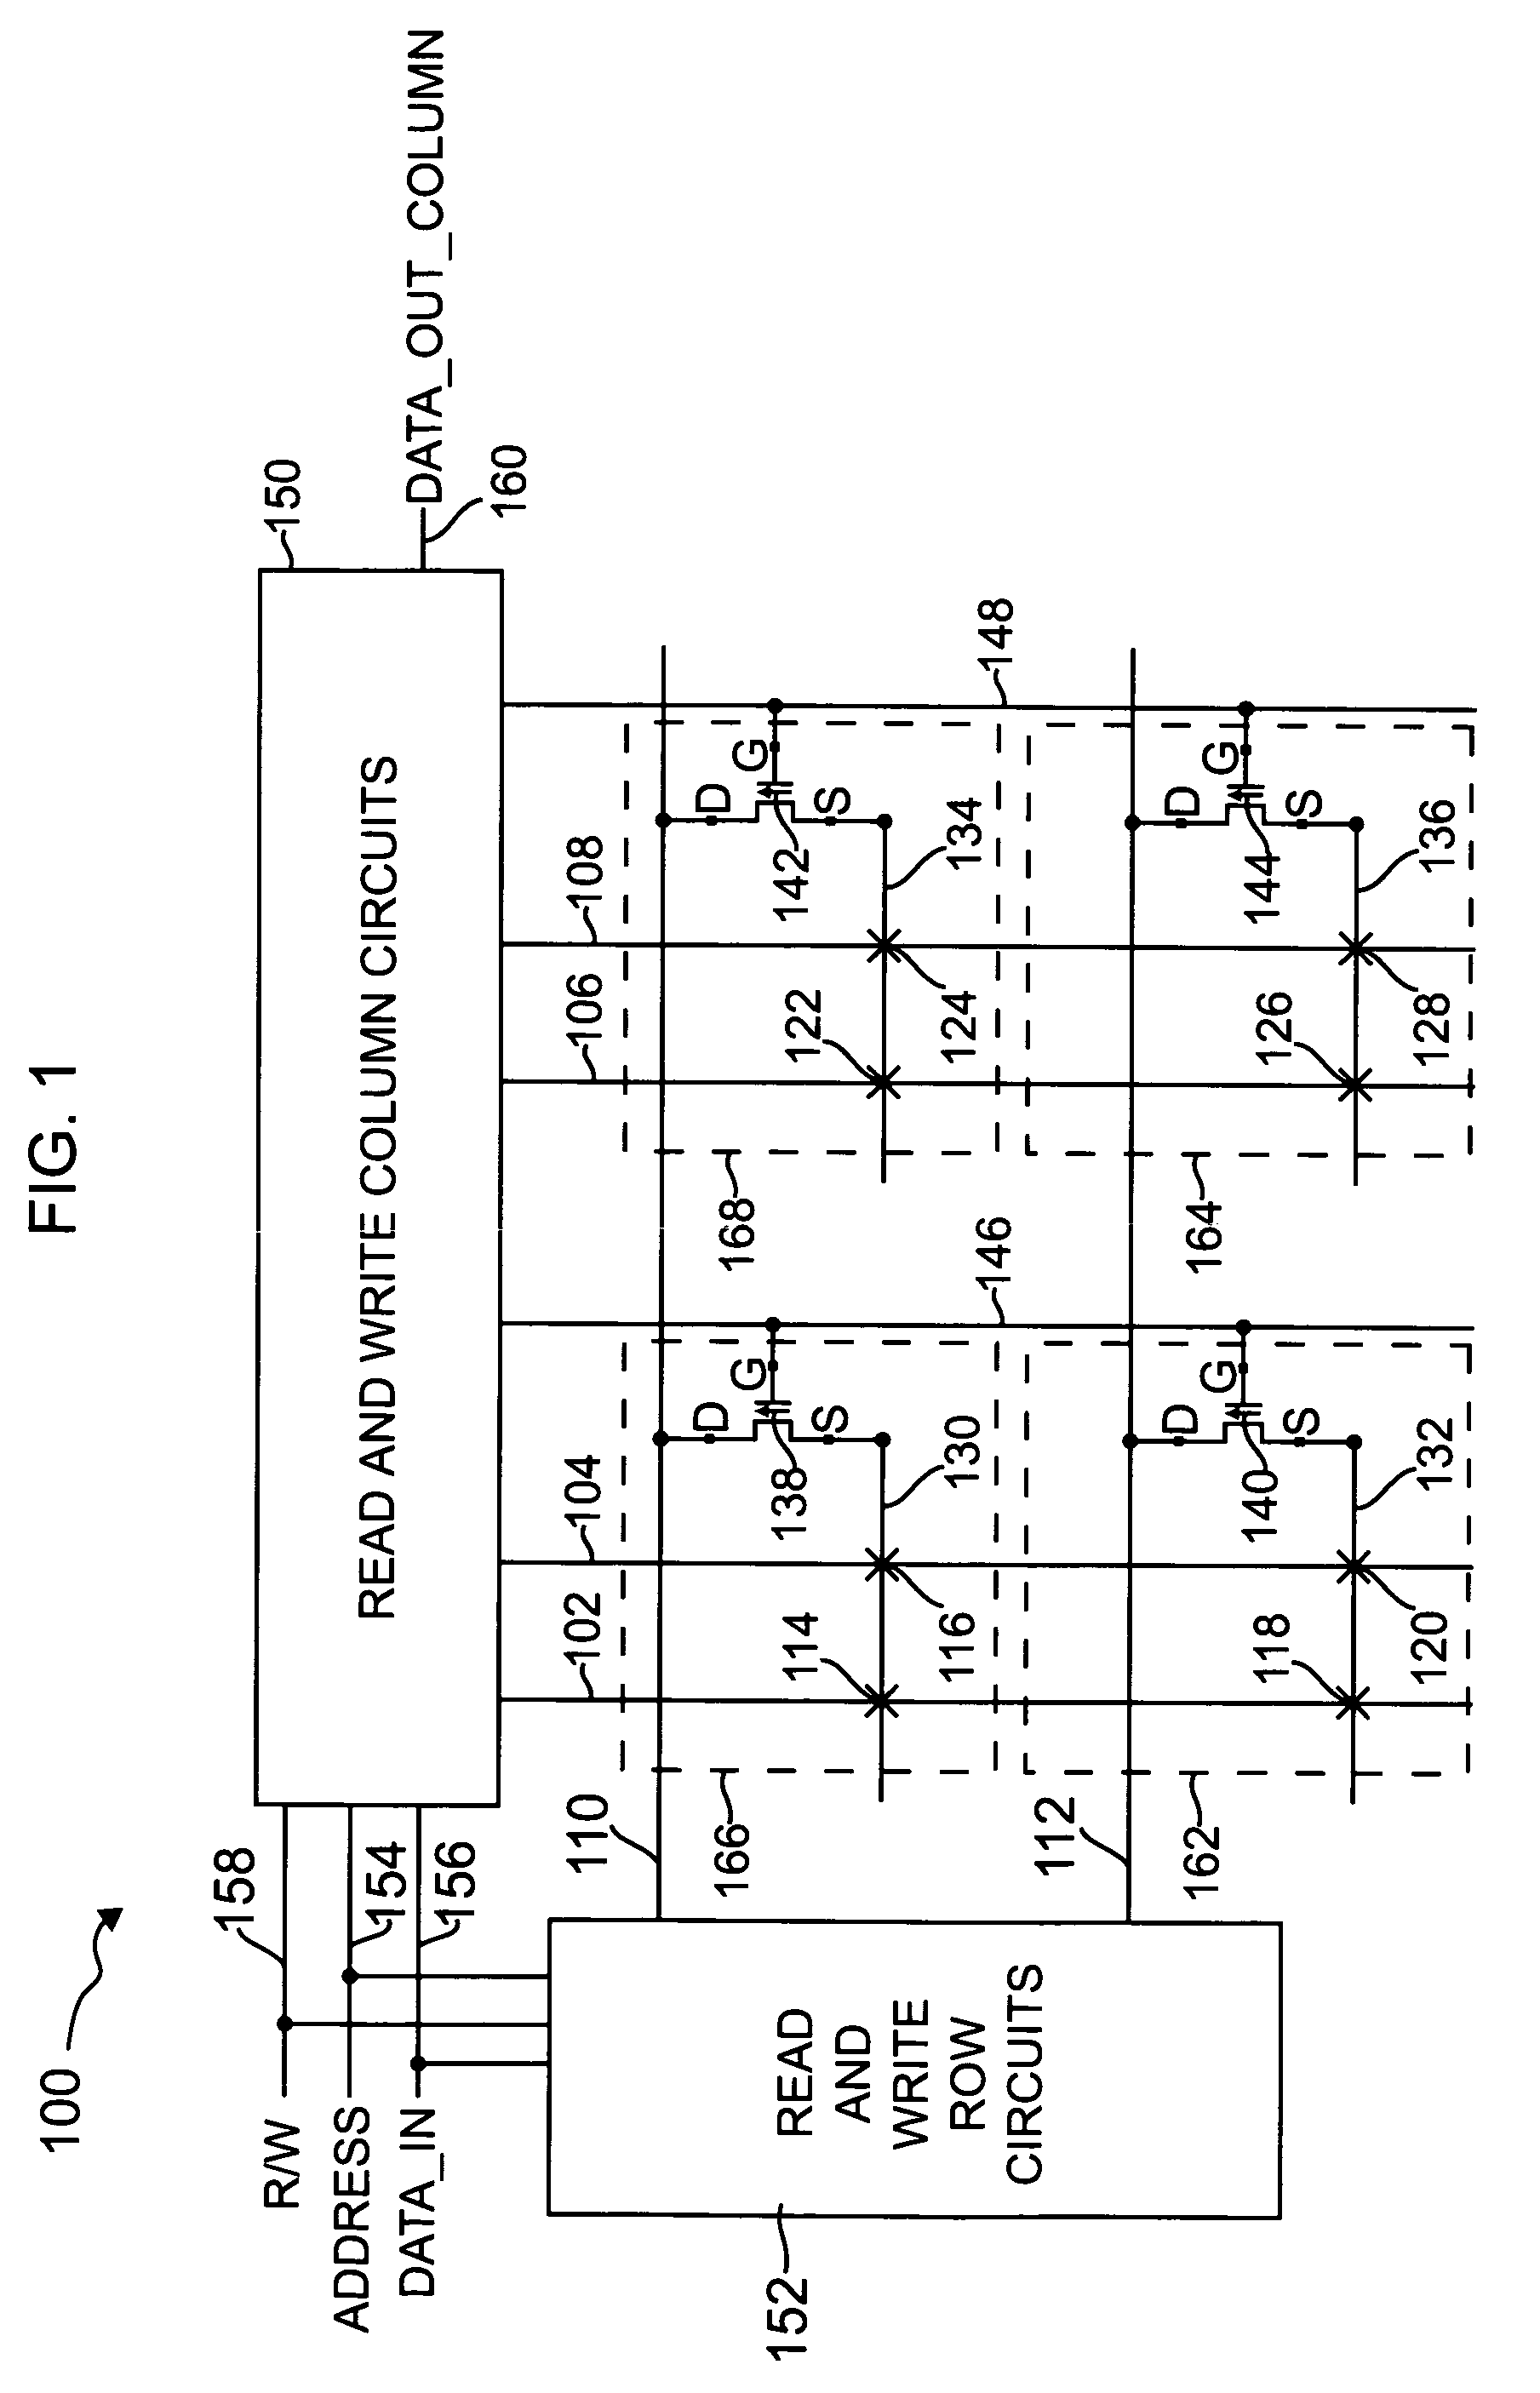 Cross-point memory architecture with improved selectivity